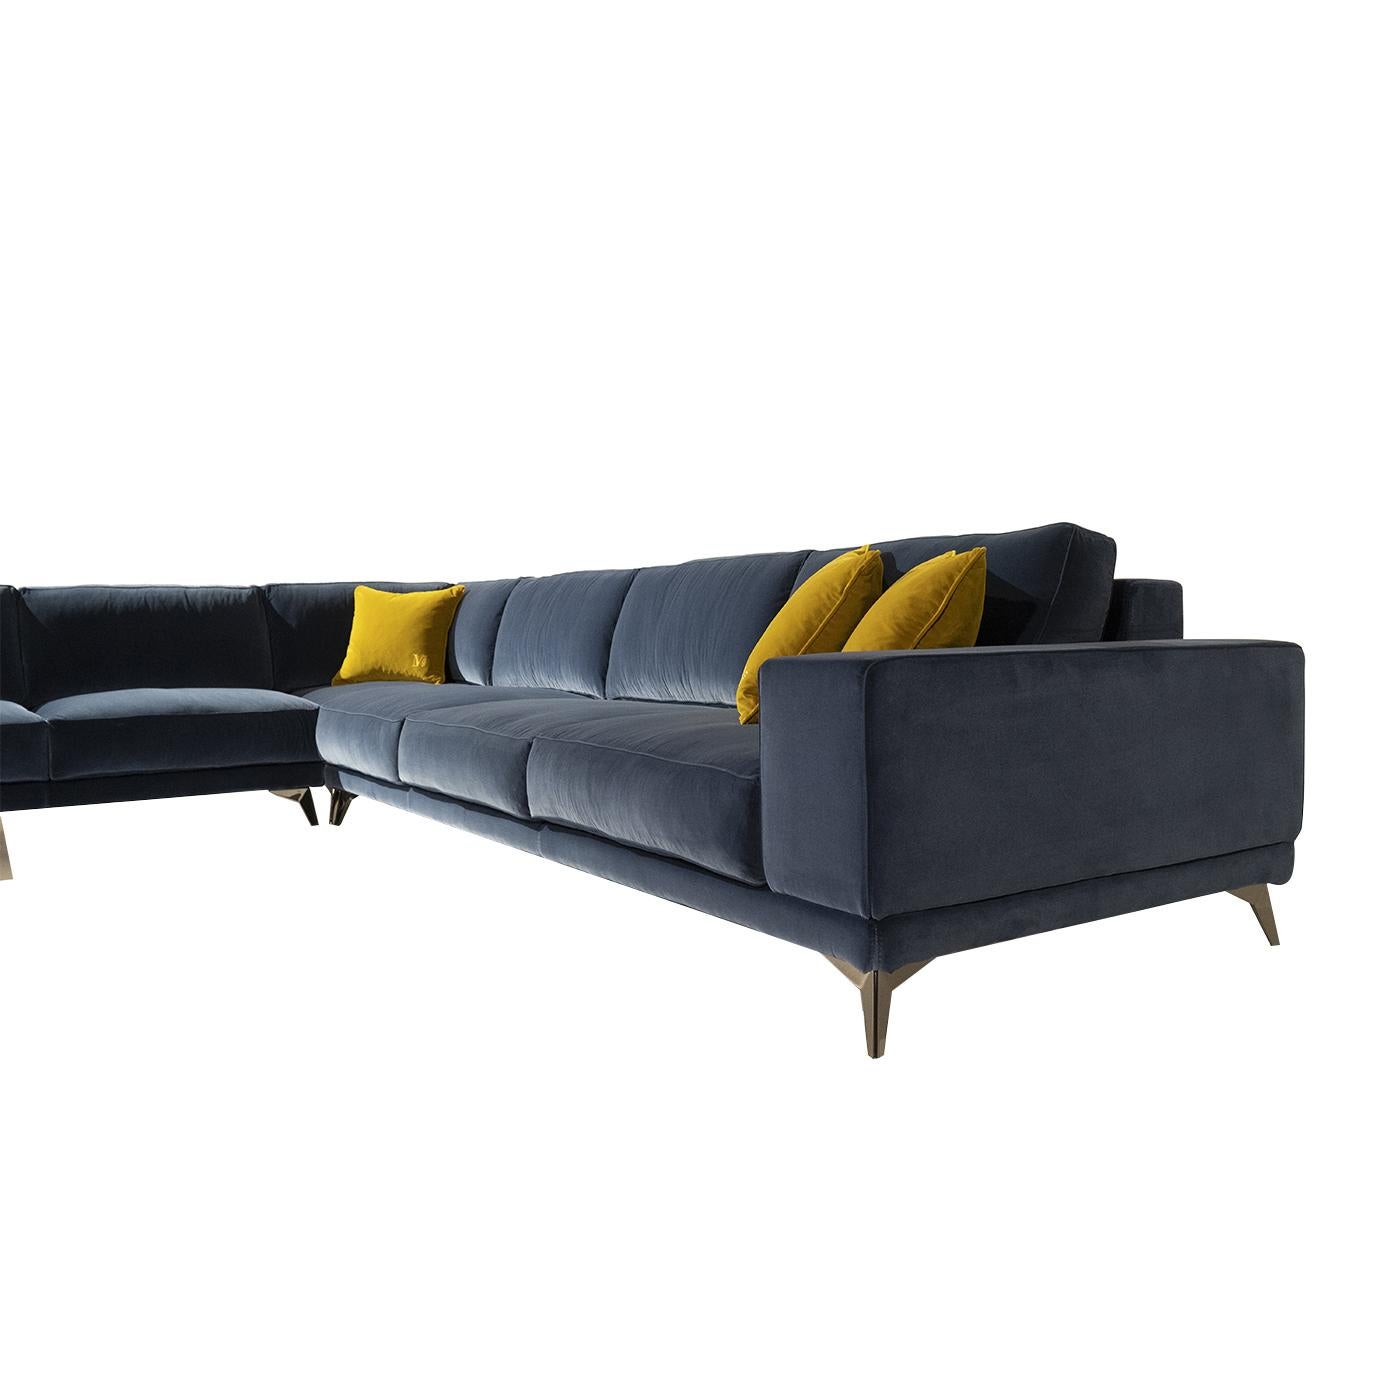 A sofa be a decorative piece as well as useful, as proves this gorgeous contemporary modular sofa from the Cosmopolitan collection, in a dark blue cotton velvet. Timeless class and sophistication characterize this sofa, which has raised